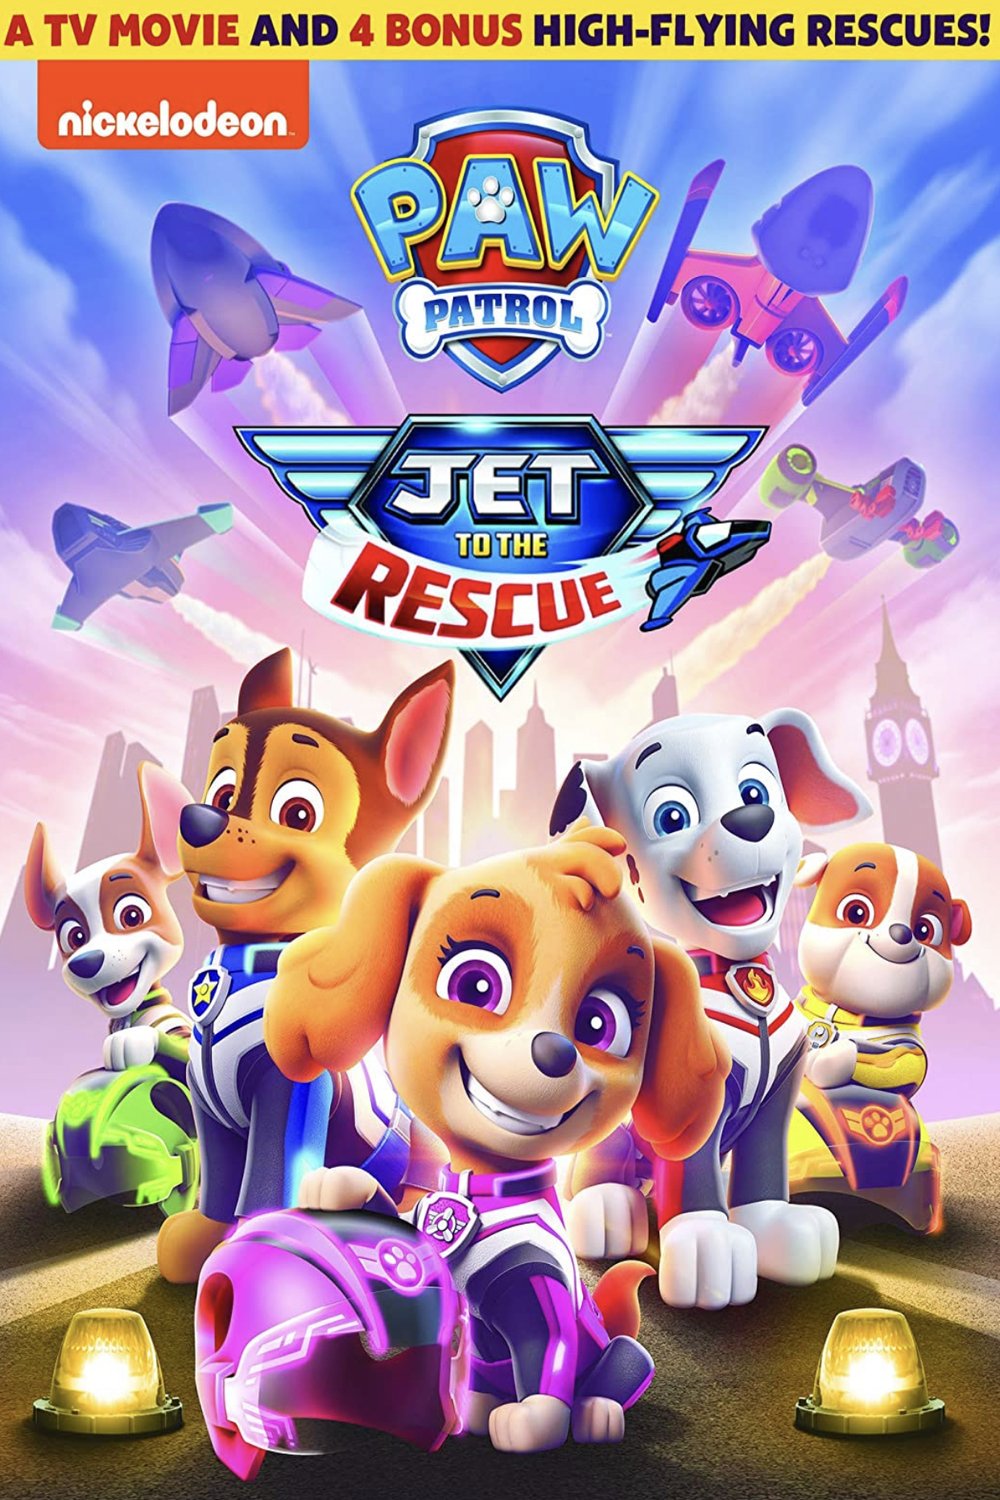 Poster of the movie Paw Patrol: Jet to the Rescue